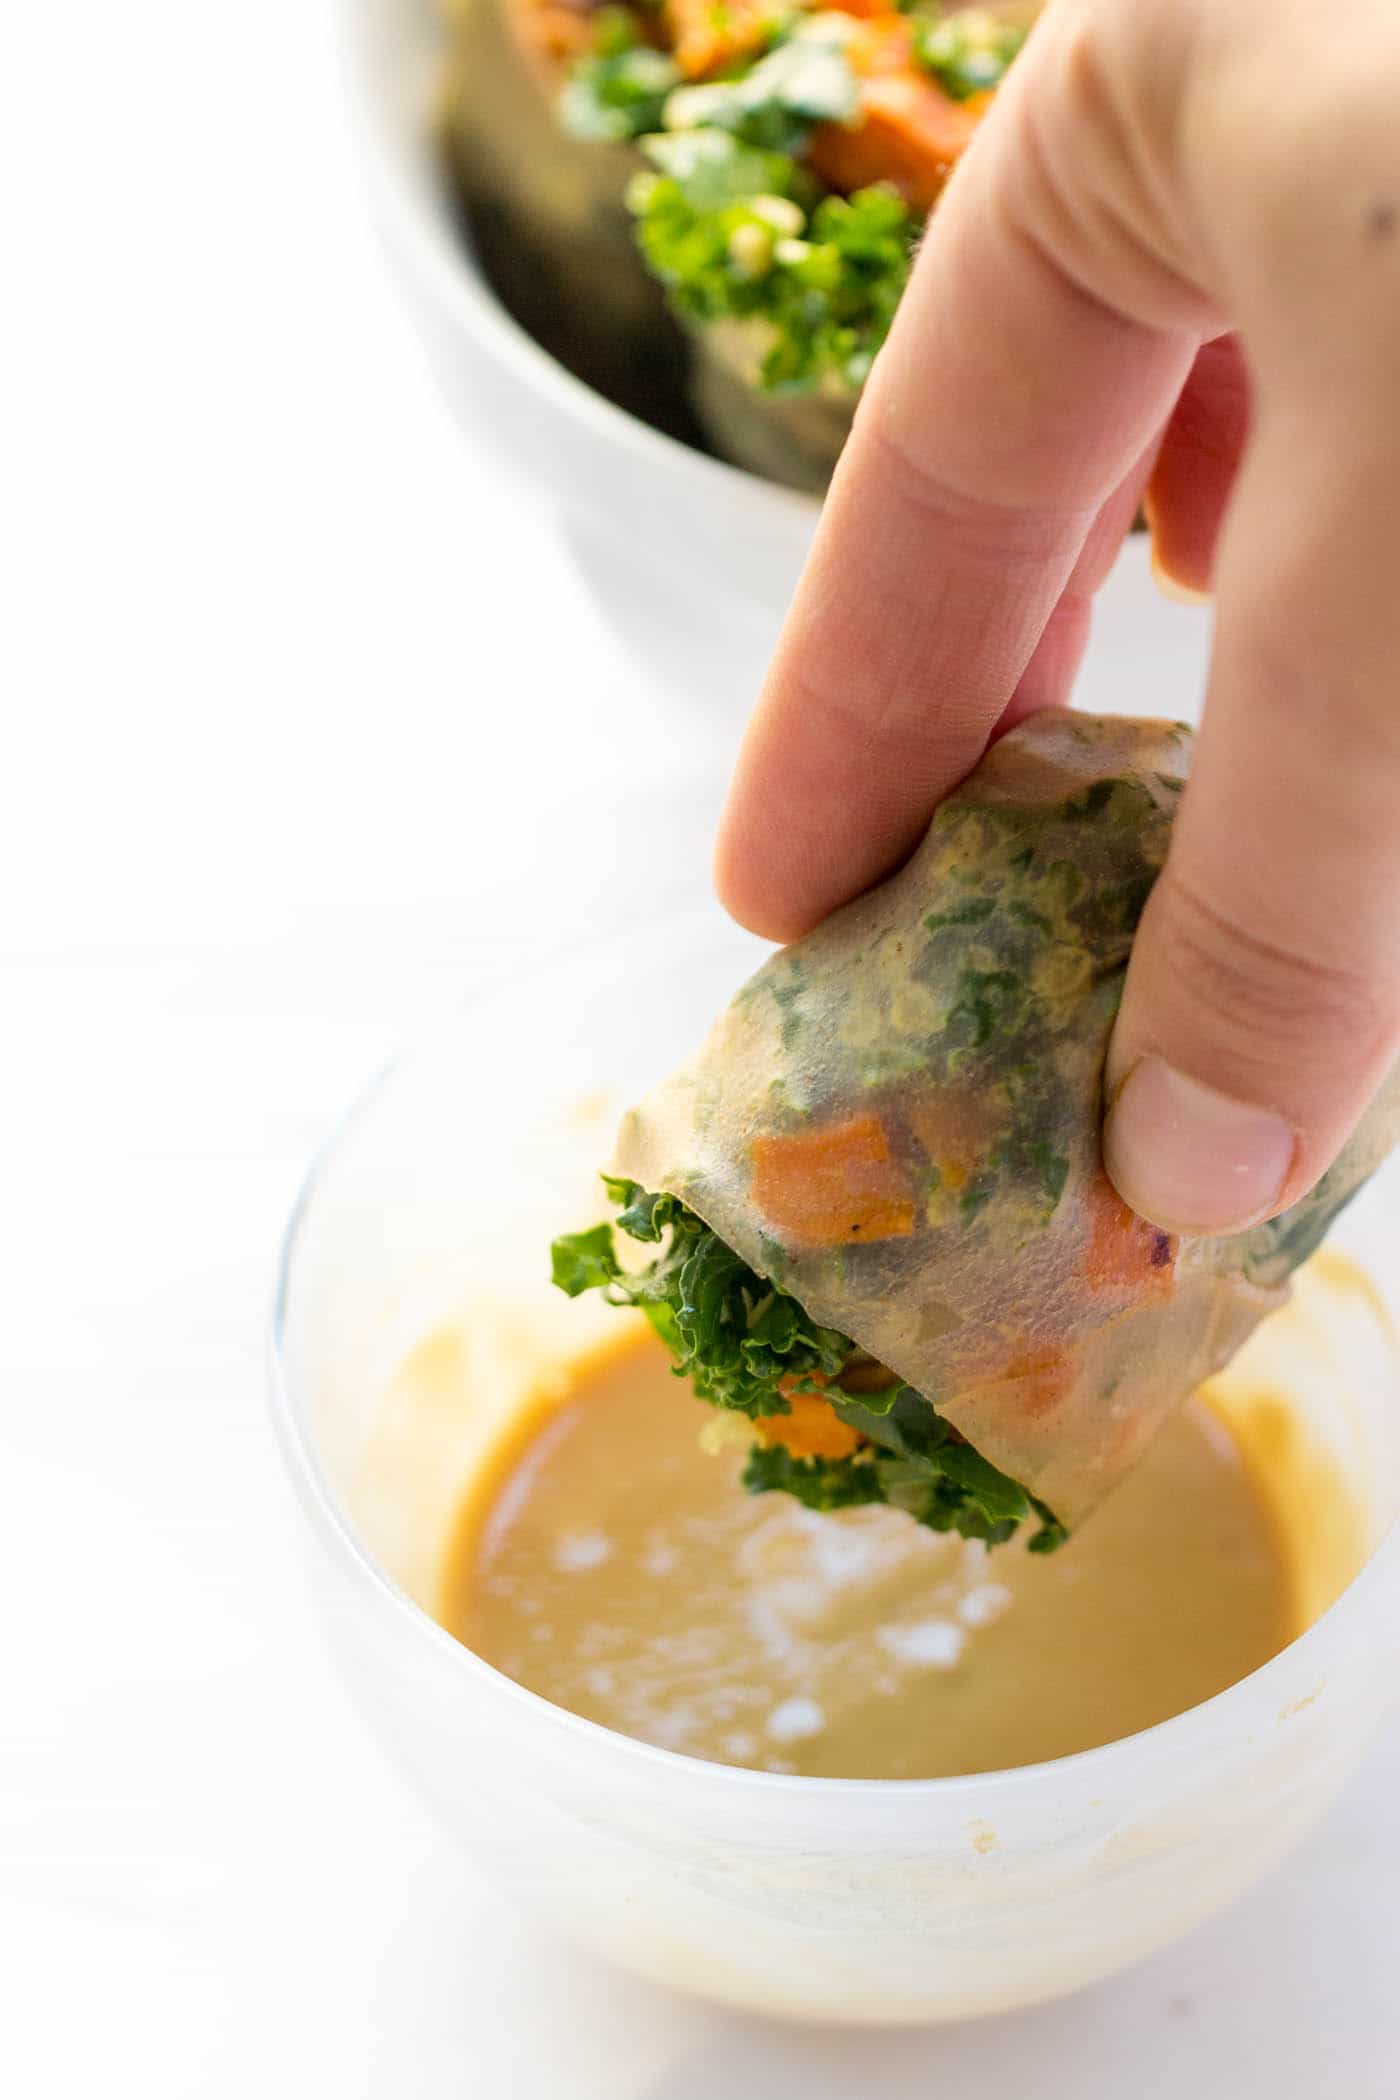 Simple Quinoa Spring Rolls made with kale and roasted sweet potato, and dipped in a miso-tahini dressing [VEGAN]